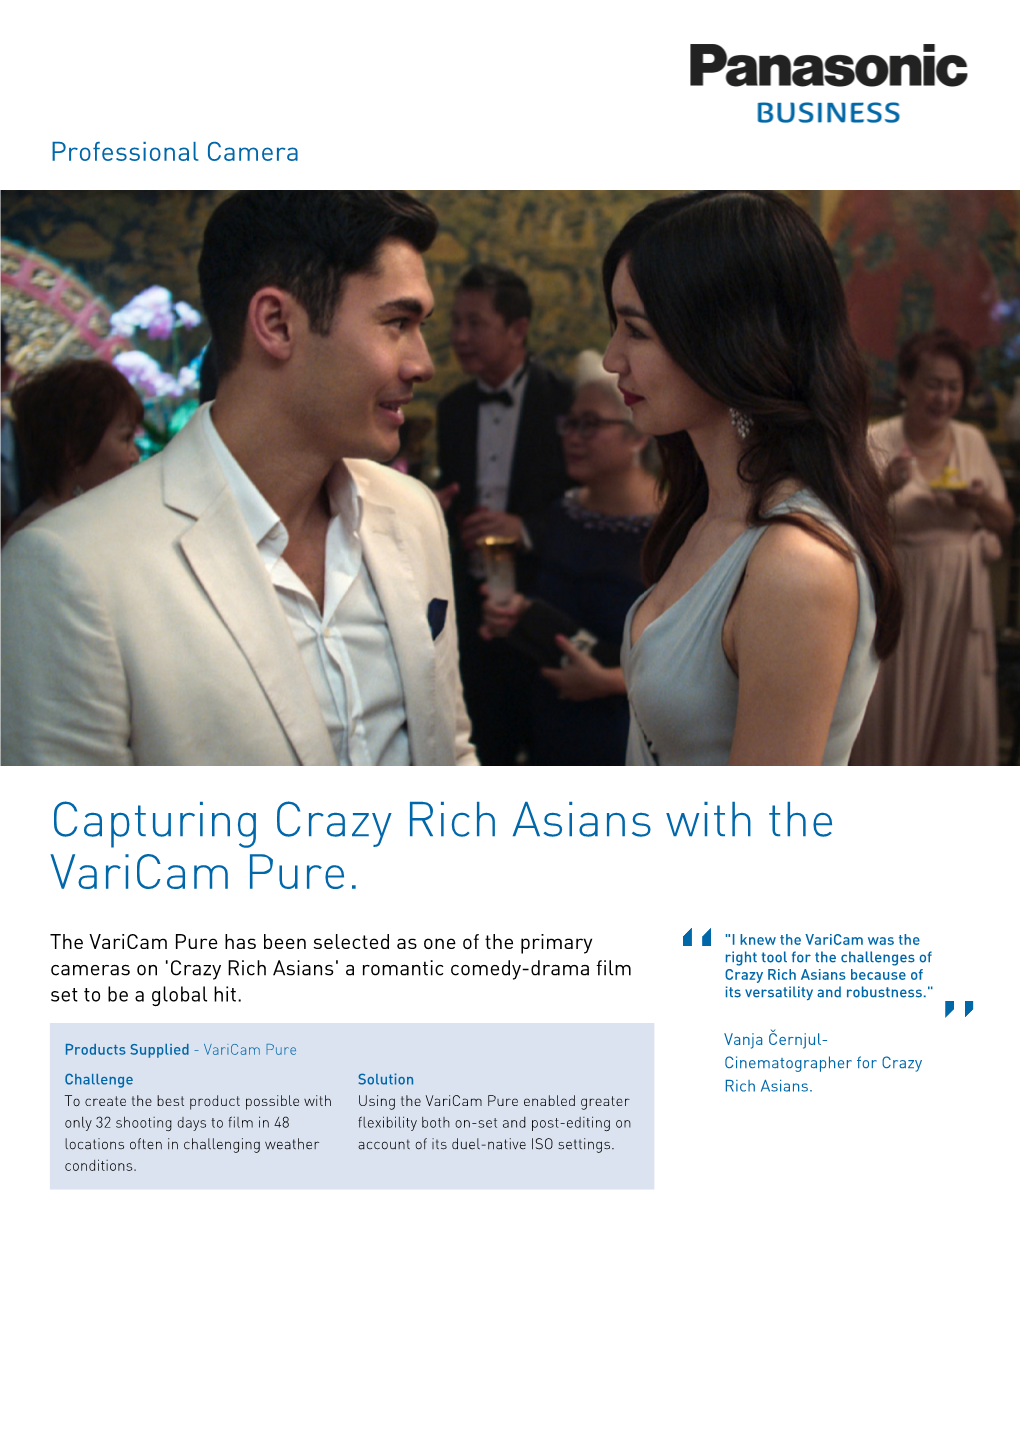 Capturing Crazy Rich Asians with the Varicam Pure